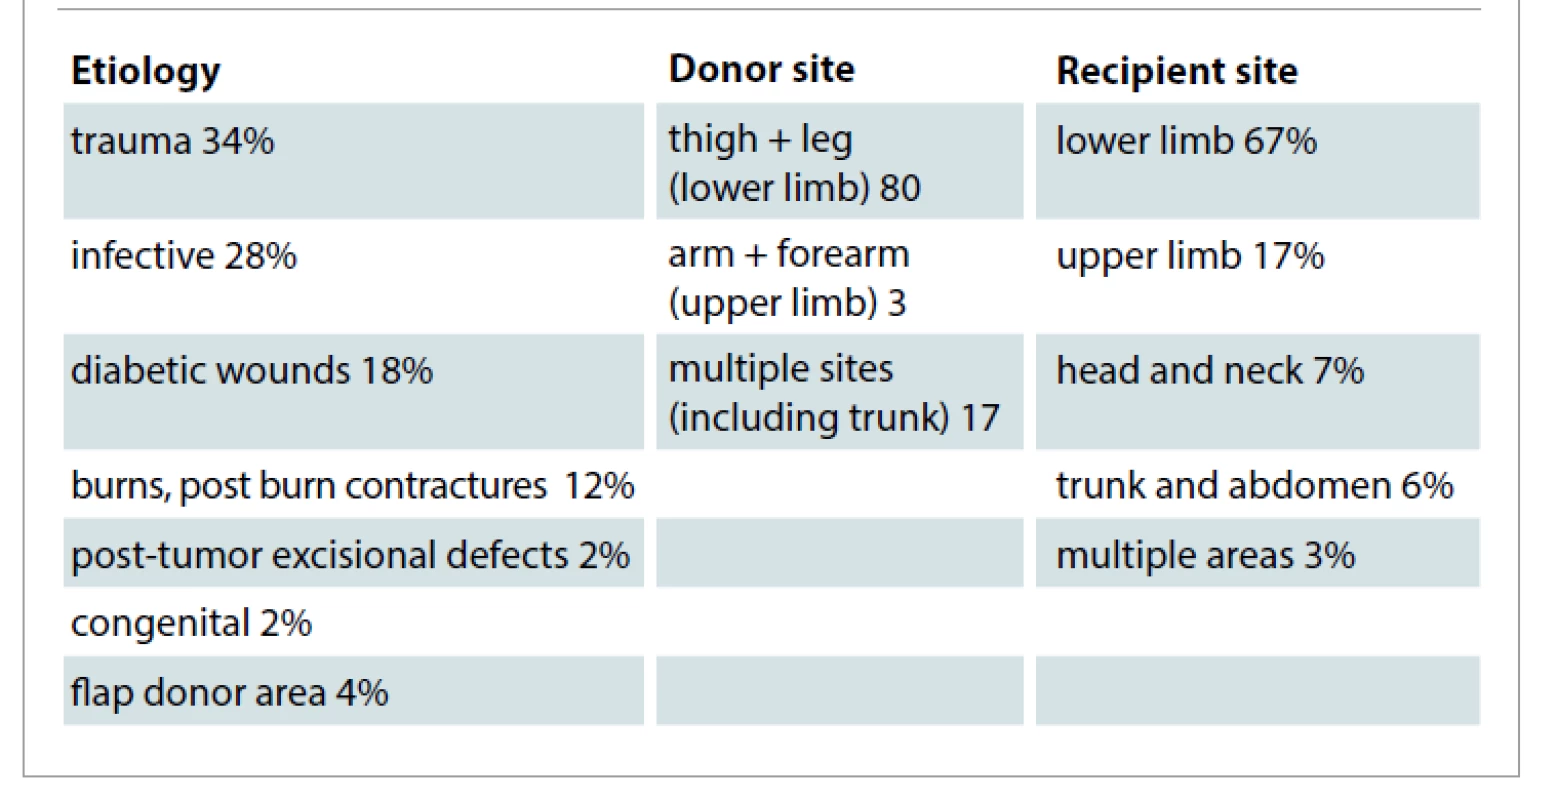 Etiology, donor and recipient sites.